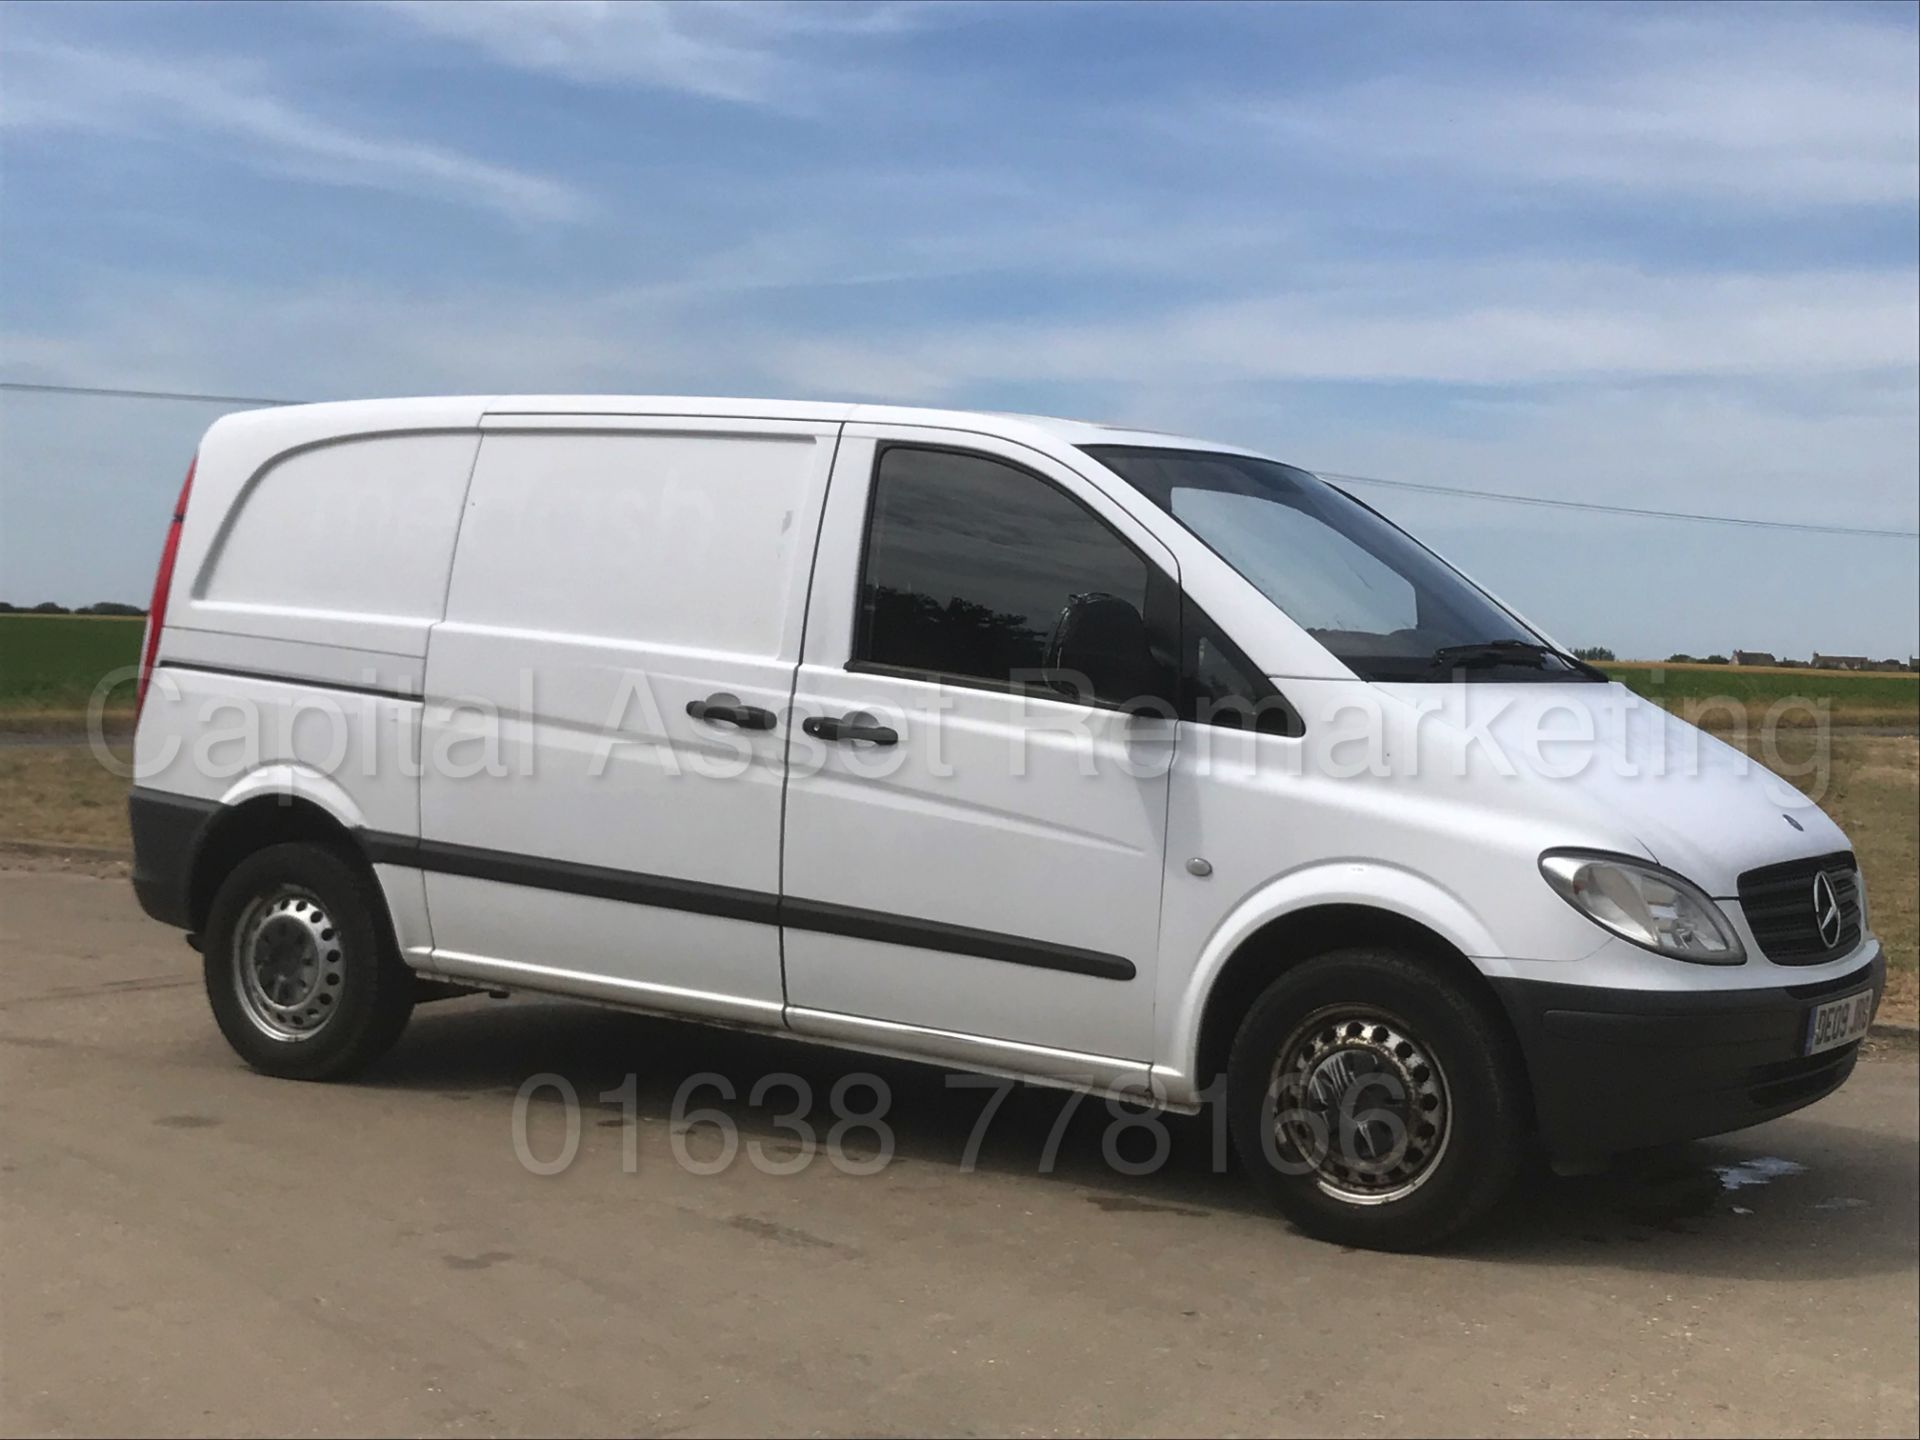 (On Sale) MERCEDES-BENZ VITO 109 CDI 'COMPACT' *PANEL VAN* (2009) '2.1 CDI - 6 SPEED' - Image 13 of 30